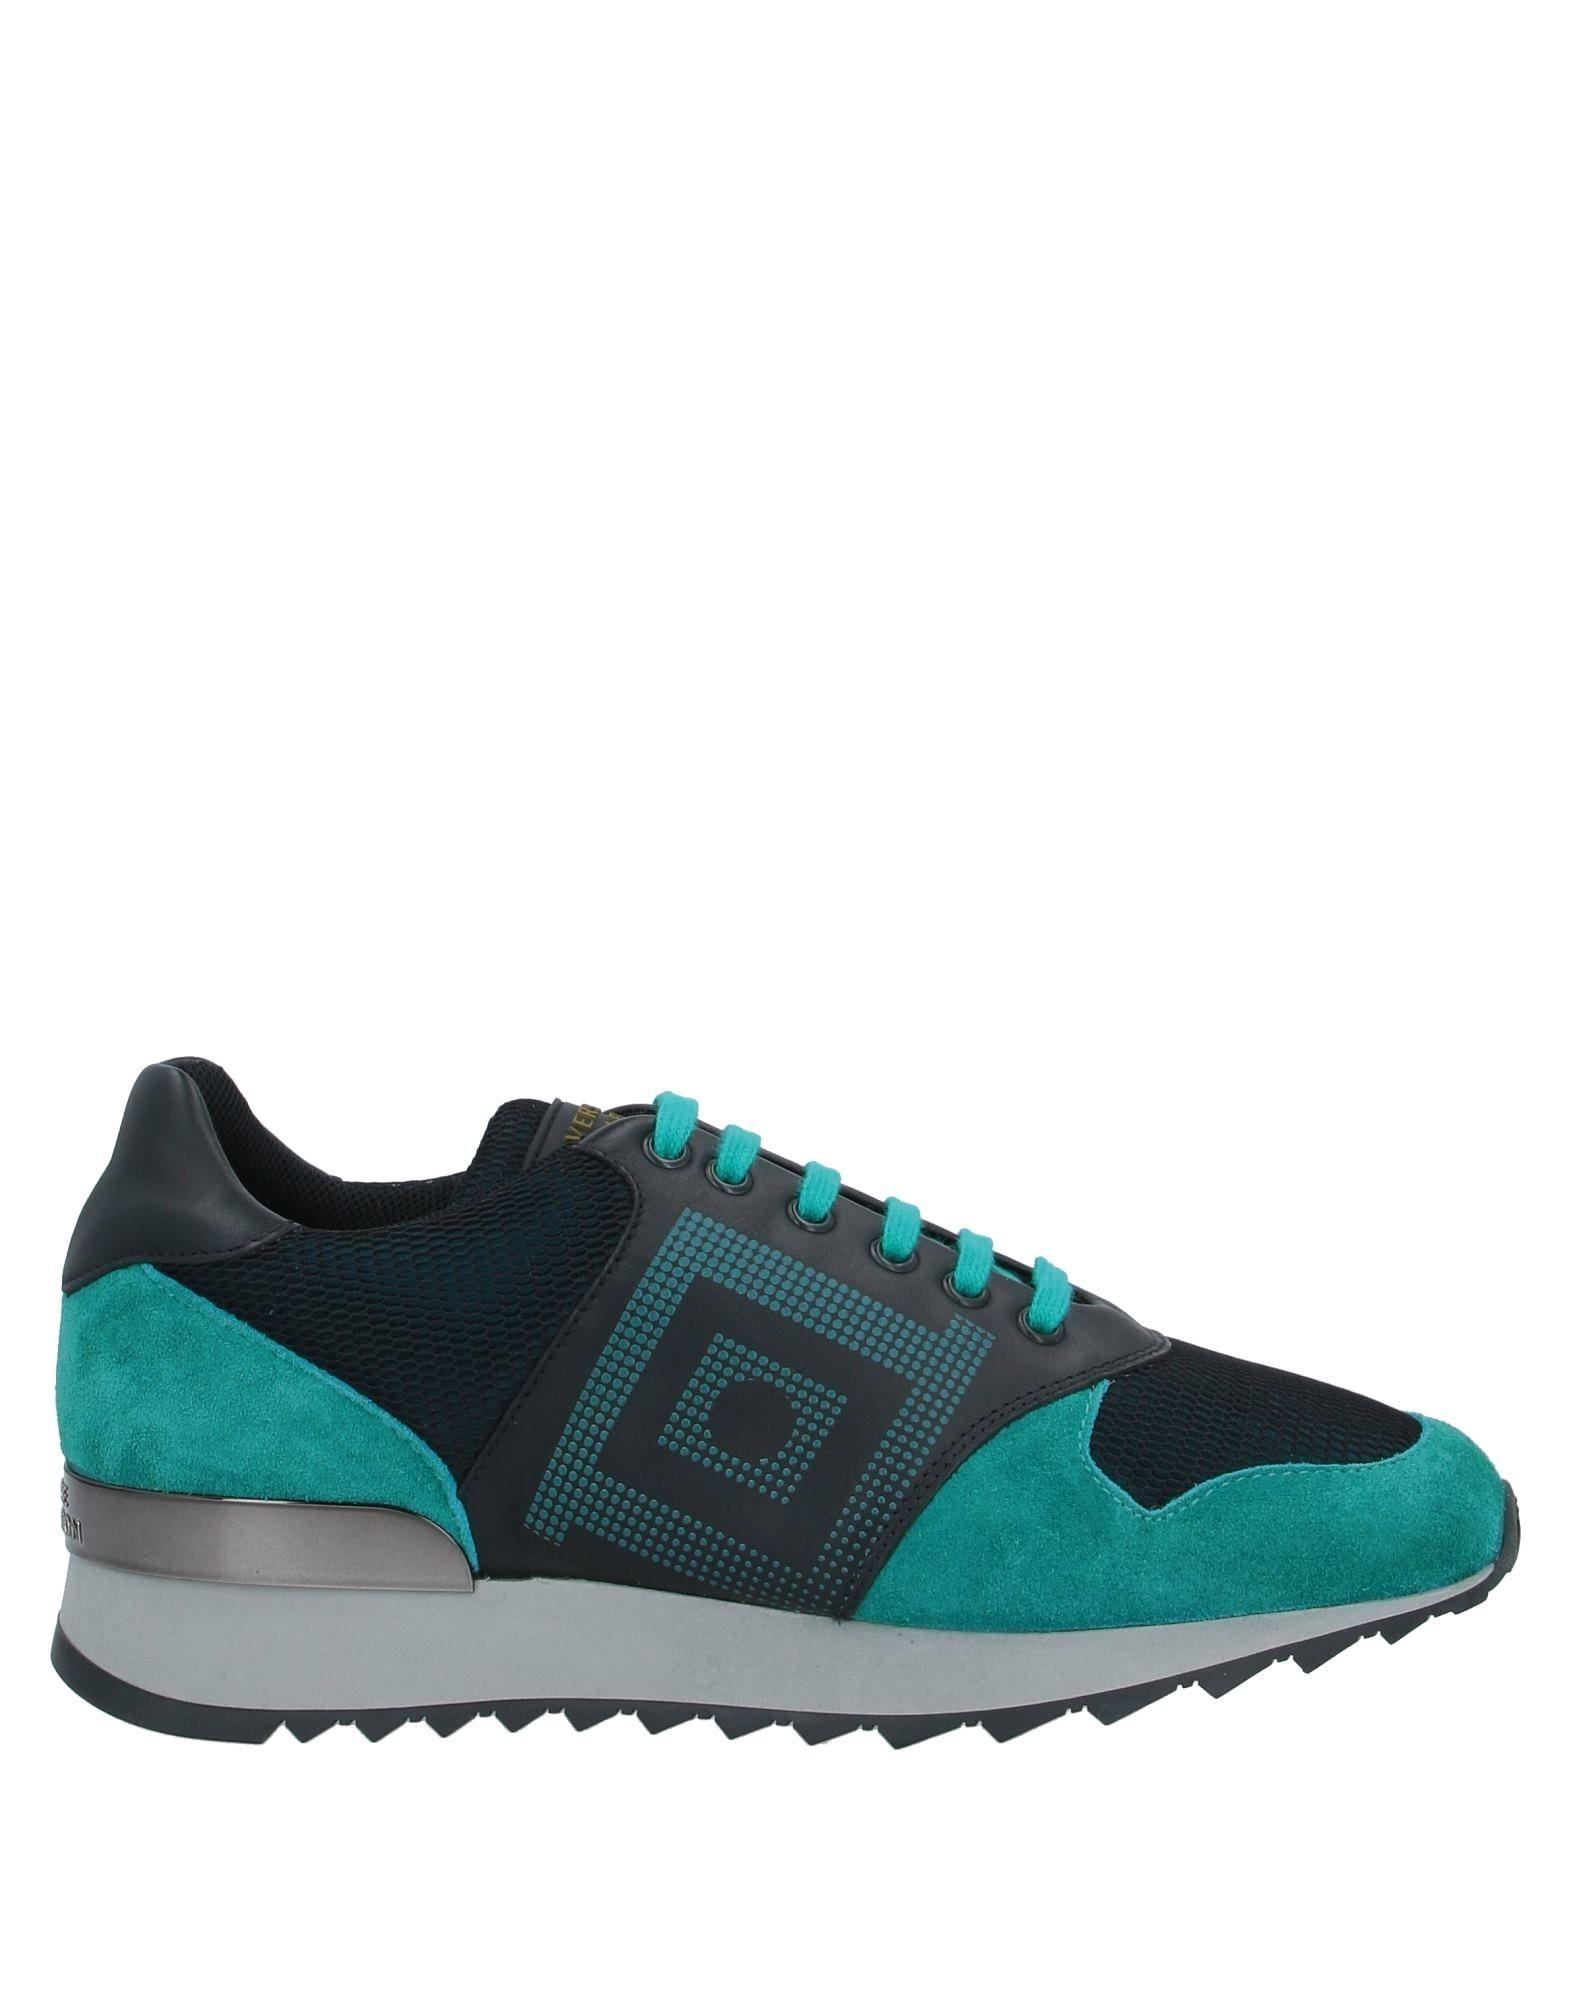 Versace Leather Low-tops & Sneakers in Green for Men - Lyst